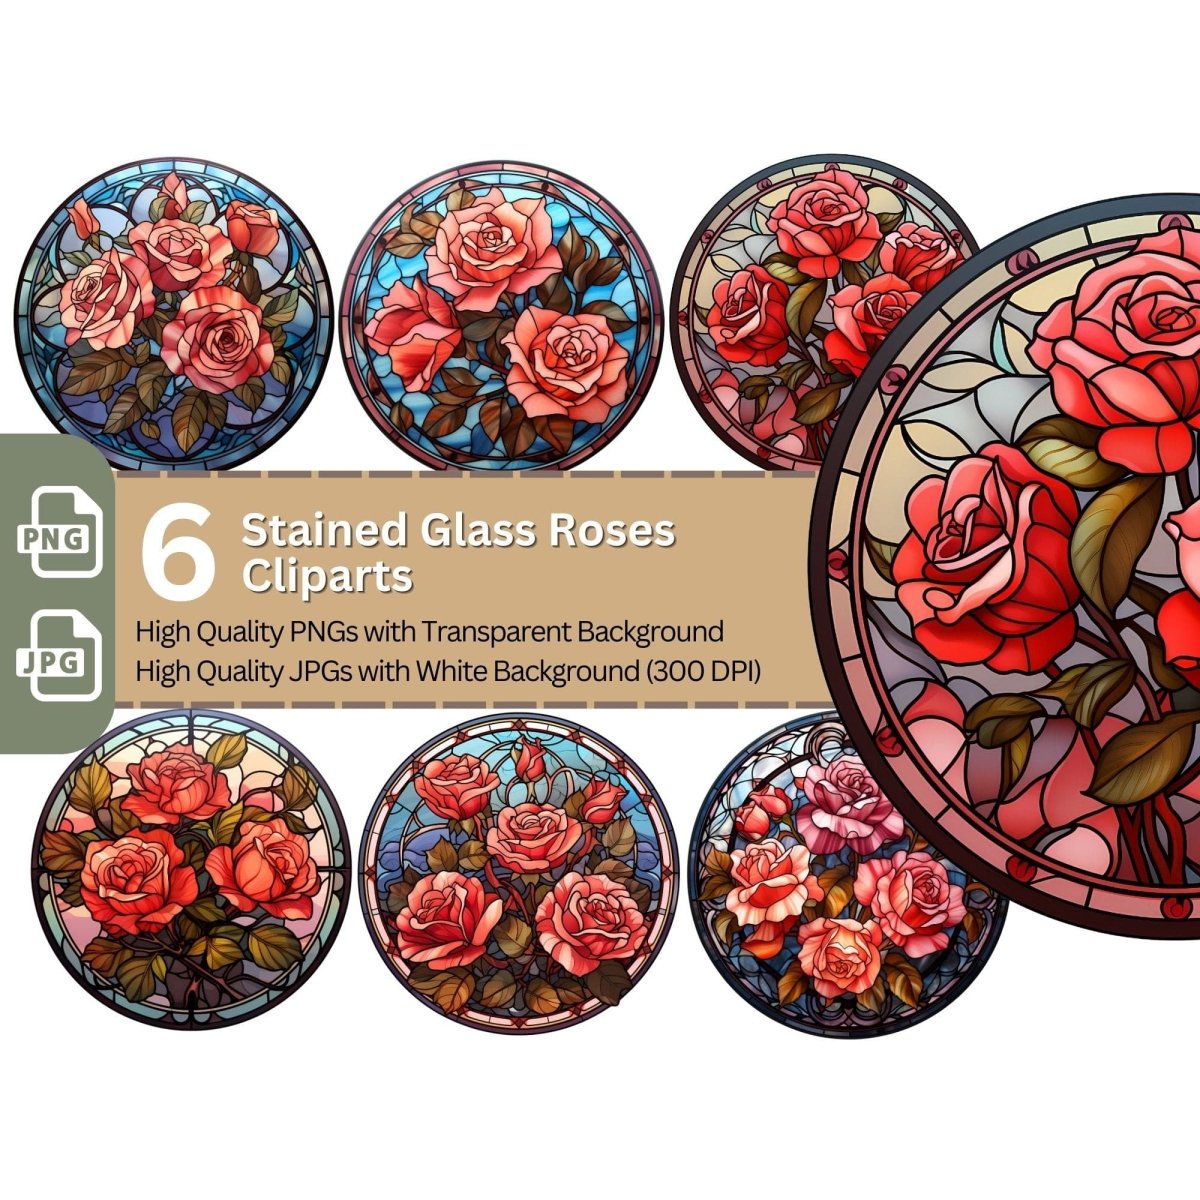 Stained Glass Roses 6+6 PNG Clip Art Bundle Gothic Roses Halloween Design - Everything Pixel